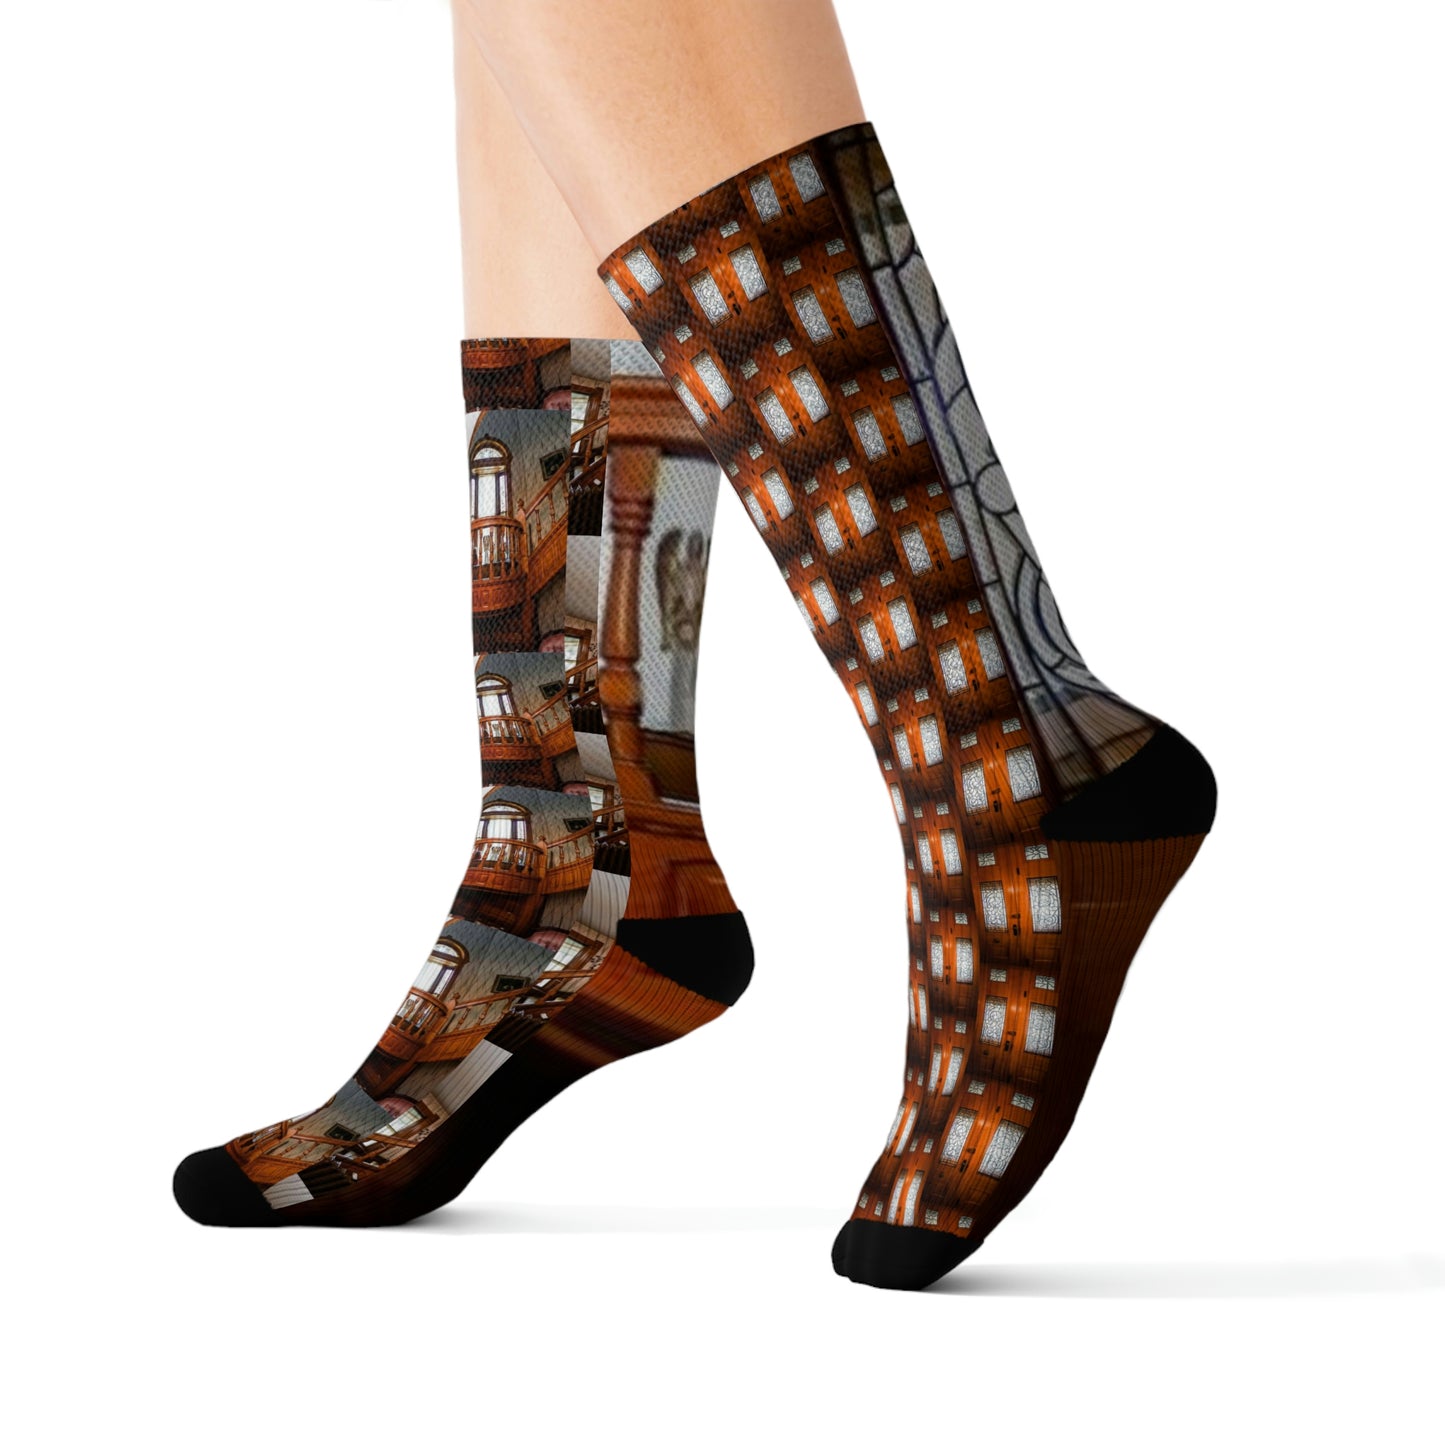 2816 N Main 45840 Housing Boom Collection Sublimation Socks